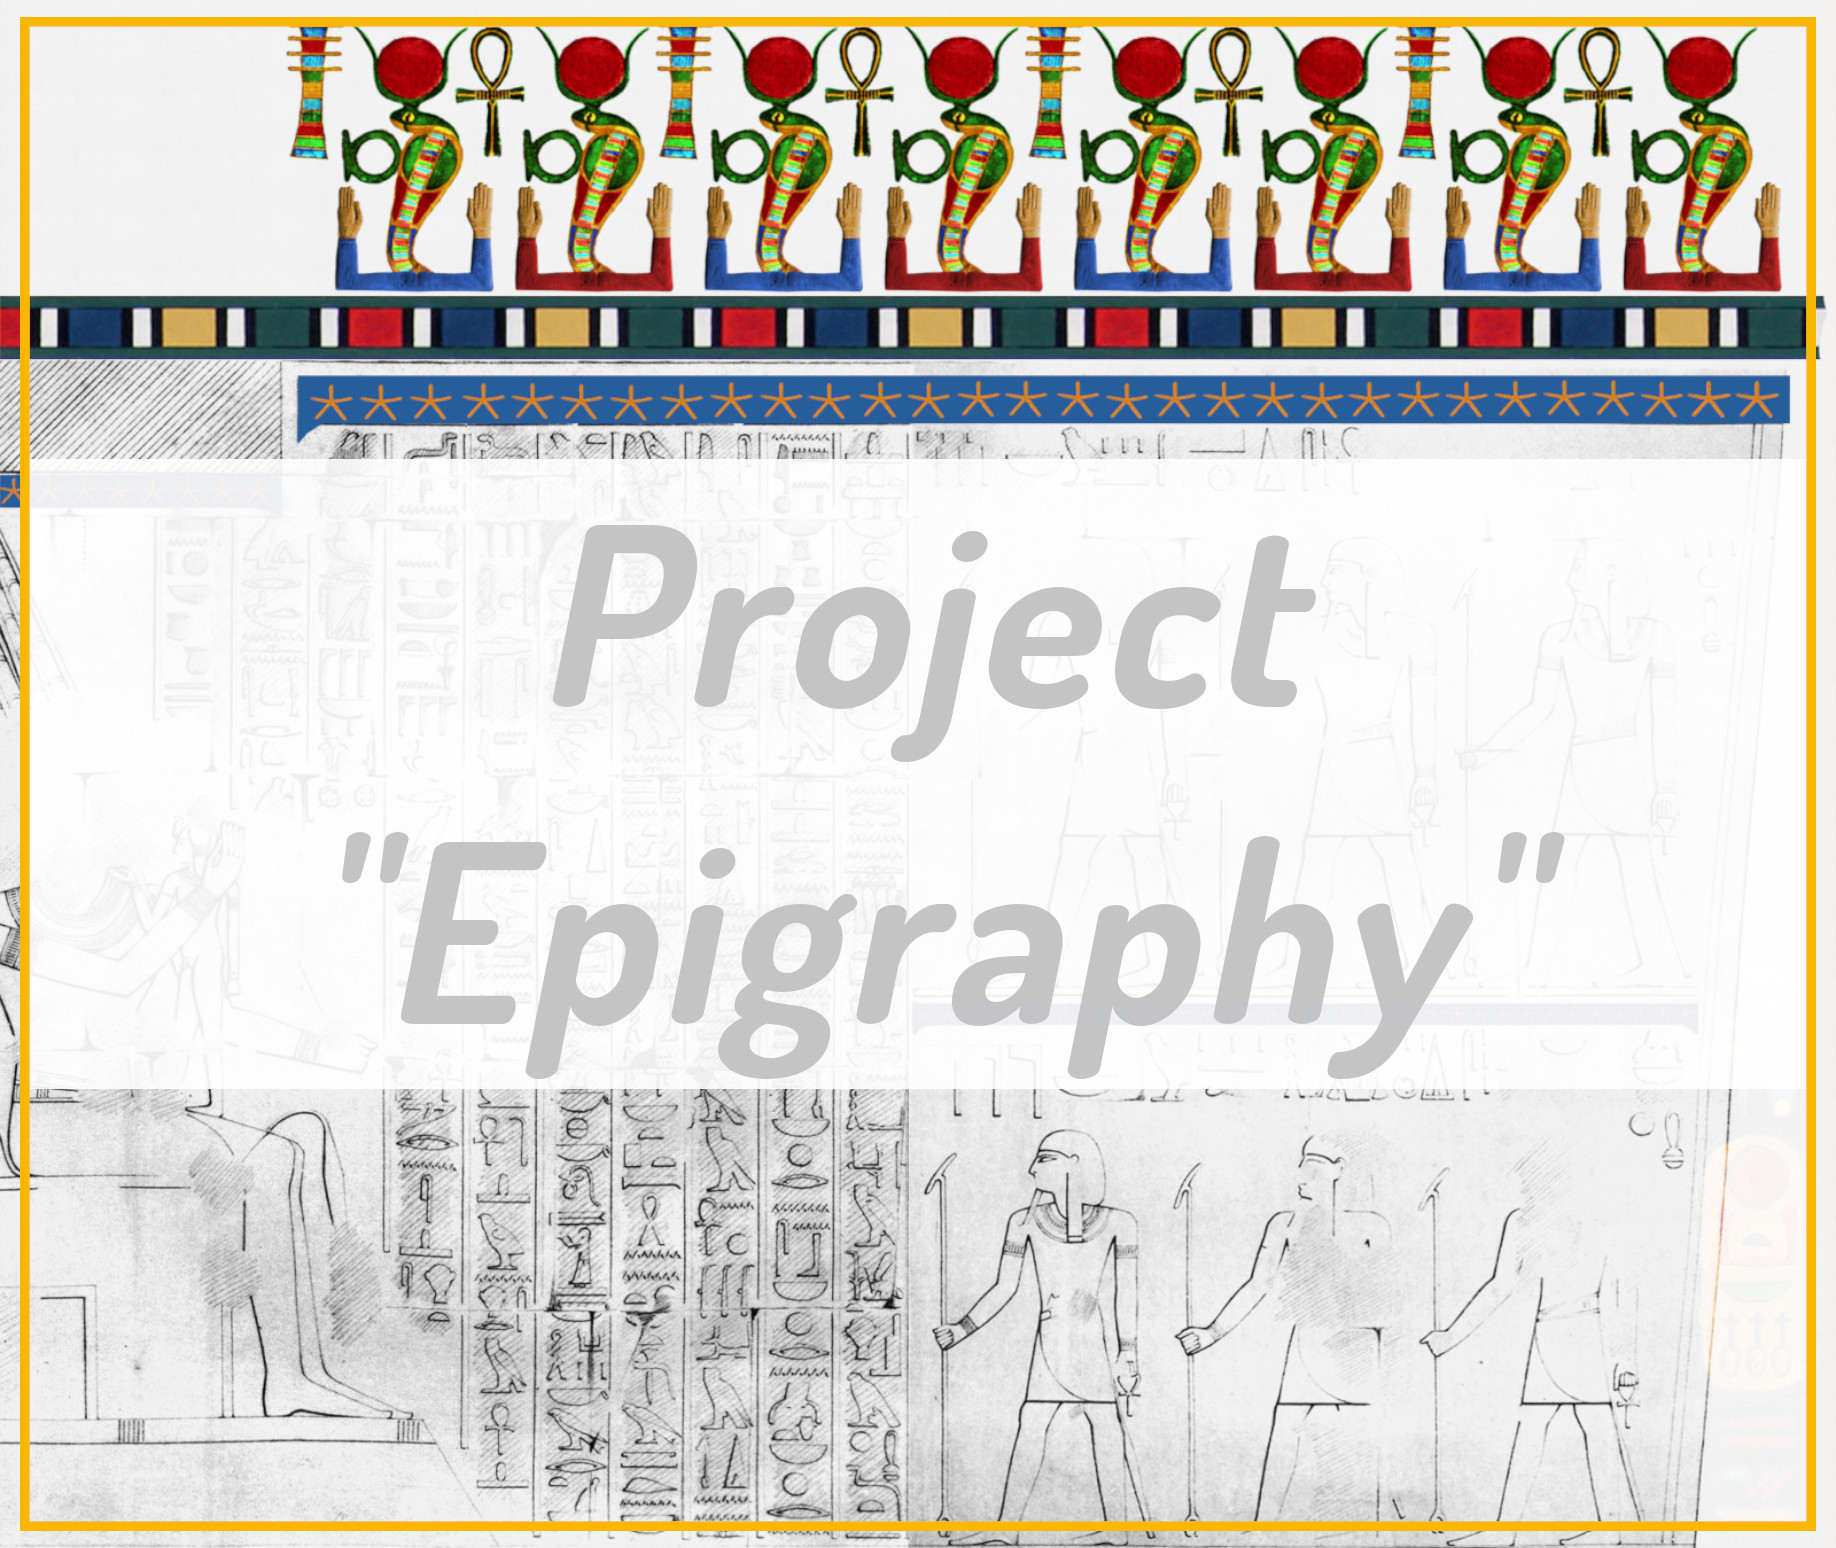 Texture example of the epigraphy project, shows part of the north wall of the birth colonnade of Hatshepsut temple